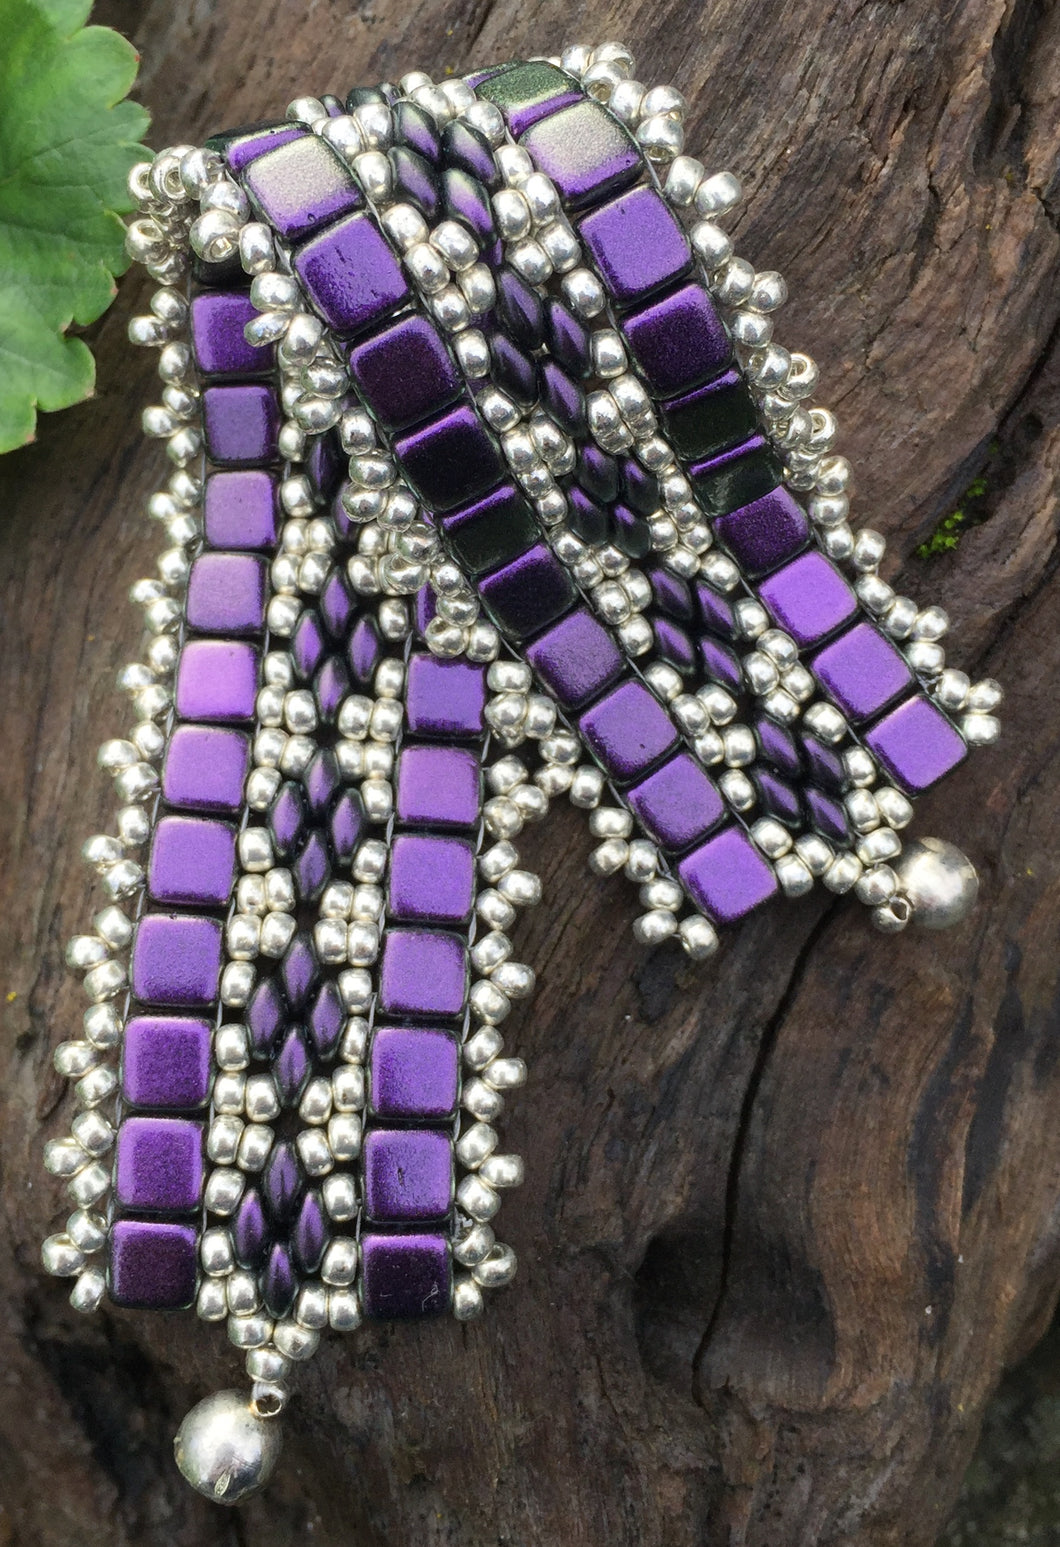 This bead woven bracelet combines velvety Dark Purple Czech Glass tiles with Silver glass seed beads and measures 6 5/8